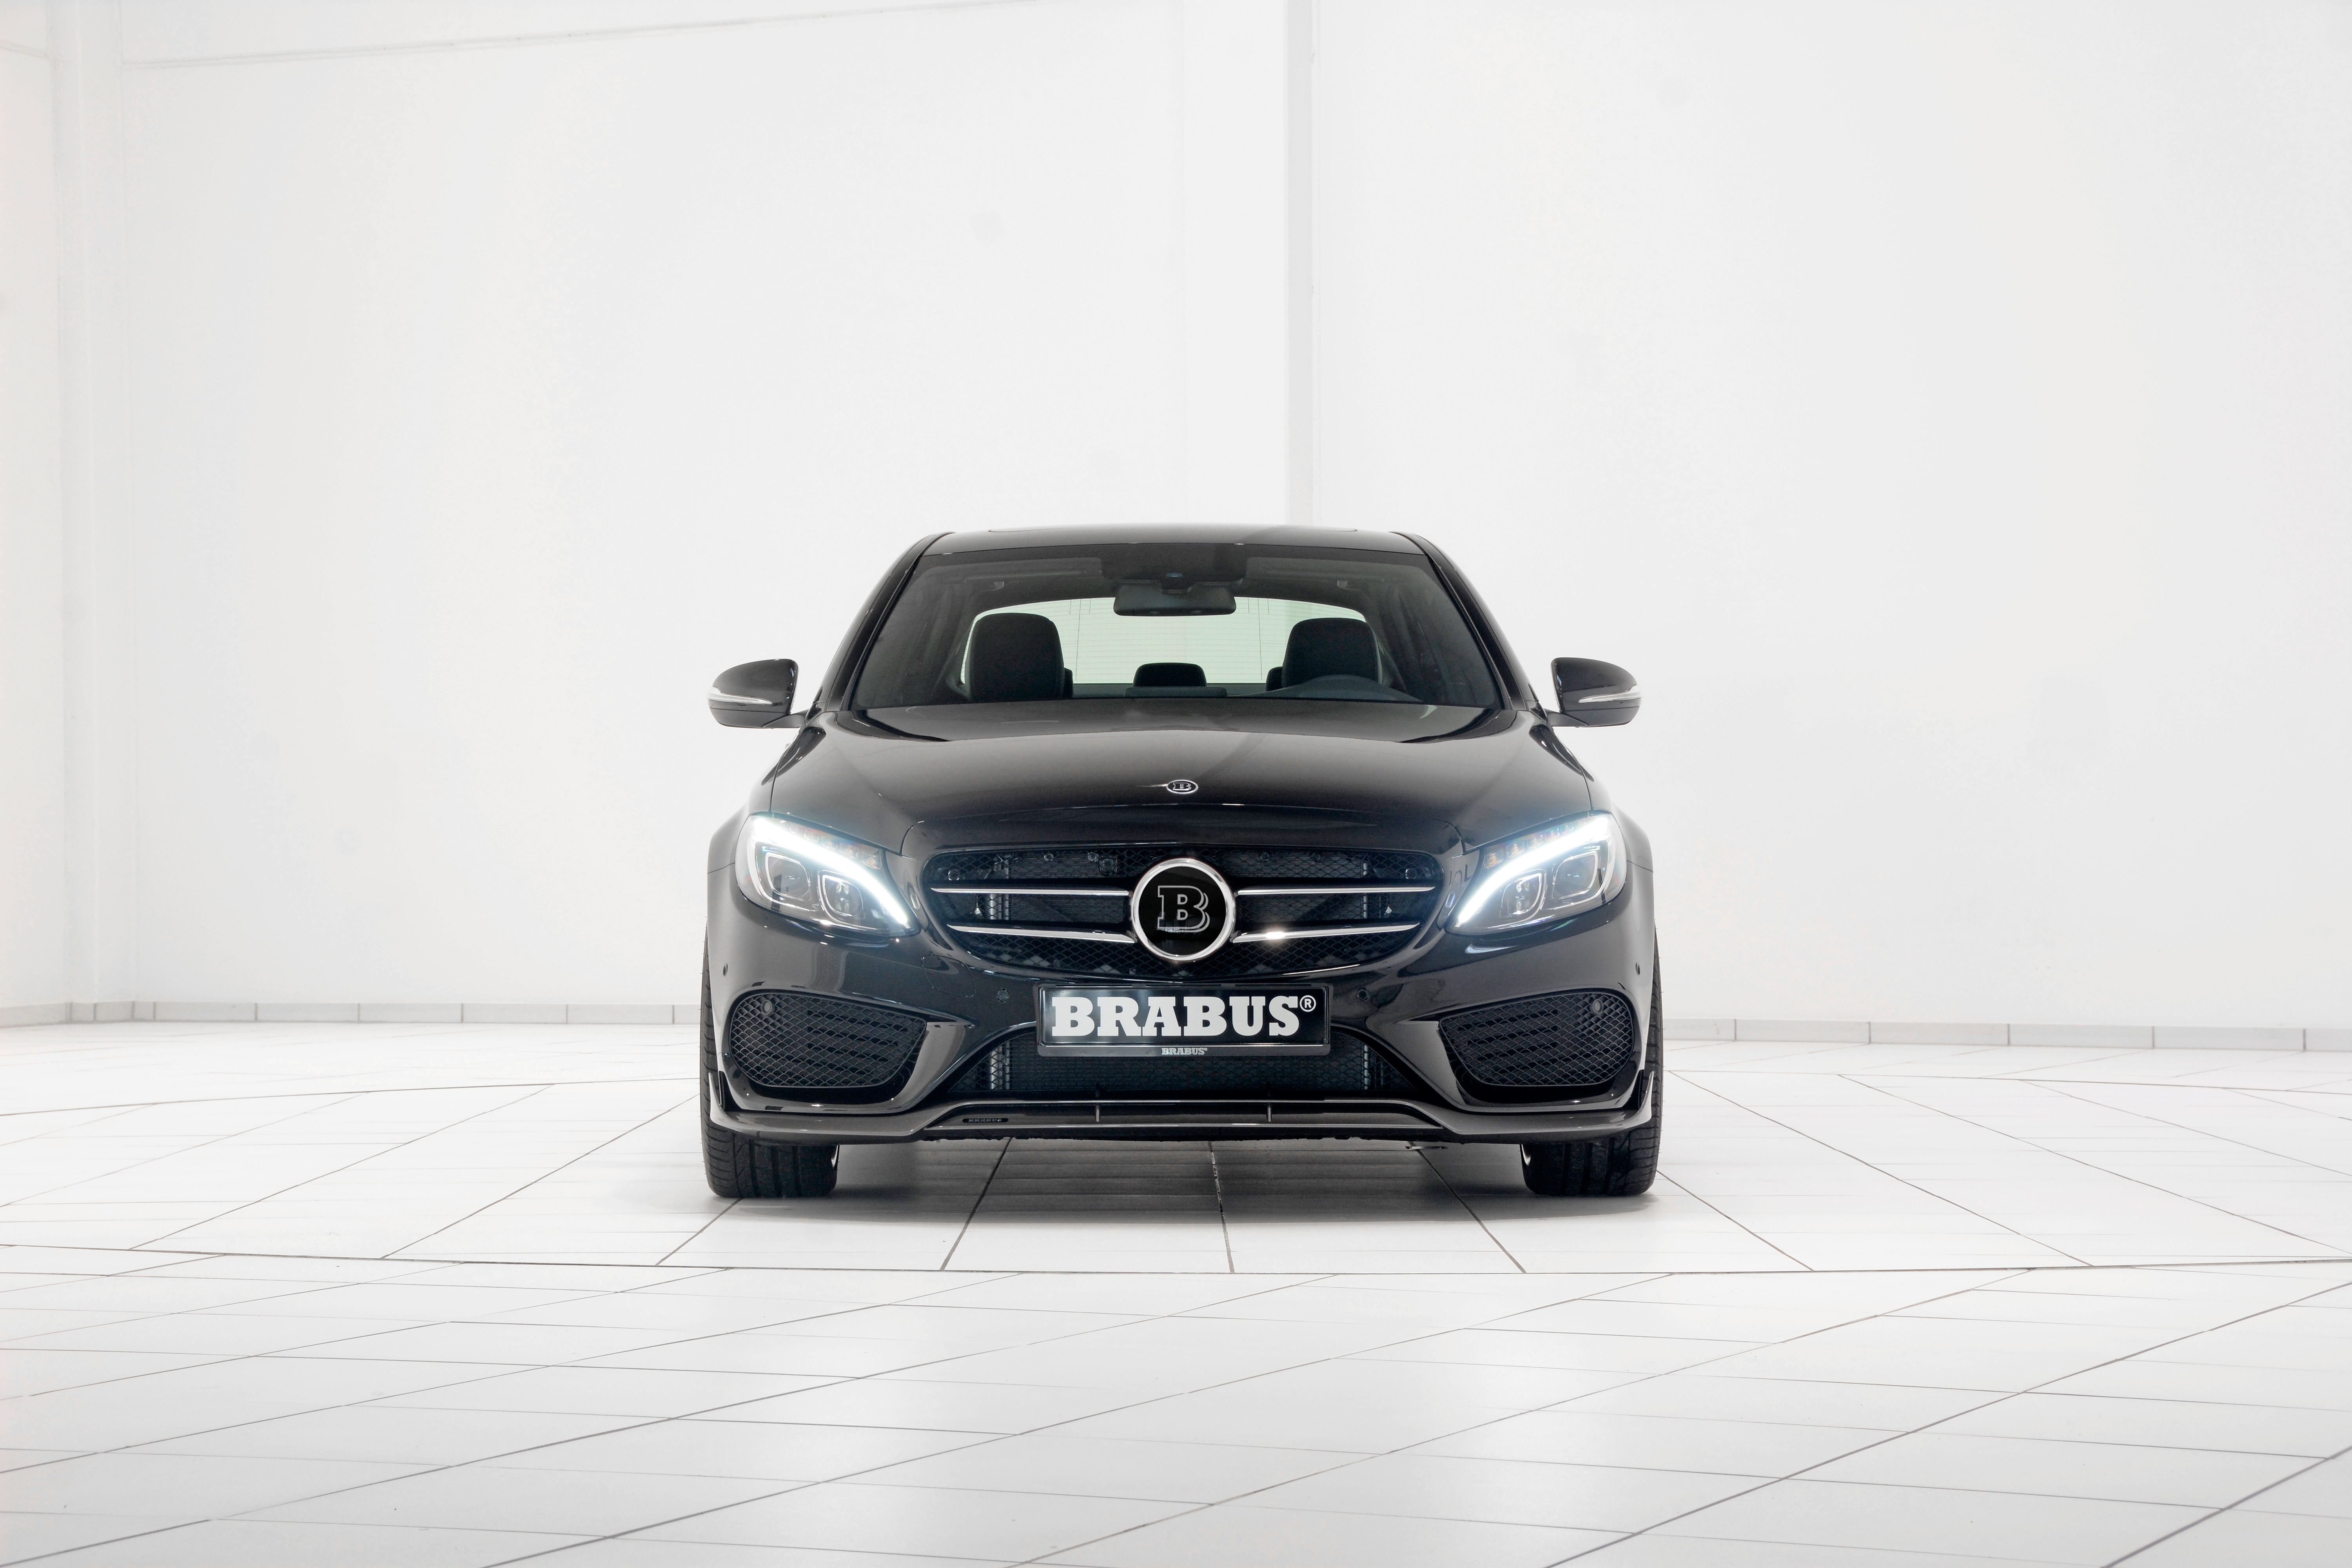 https://mbworld.org/forums/attachments/c-class-w205/394516d1501524762-3wd-brabus-w205-tuning-package-c-classw2053_zps072dbae8.jpg